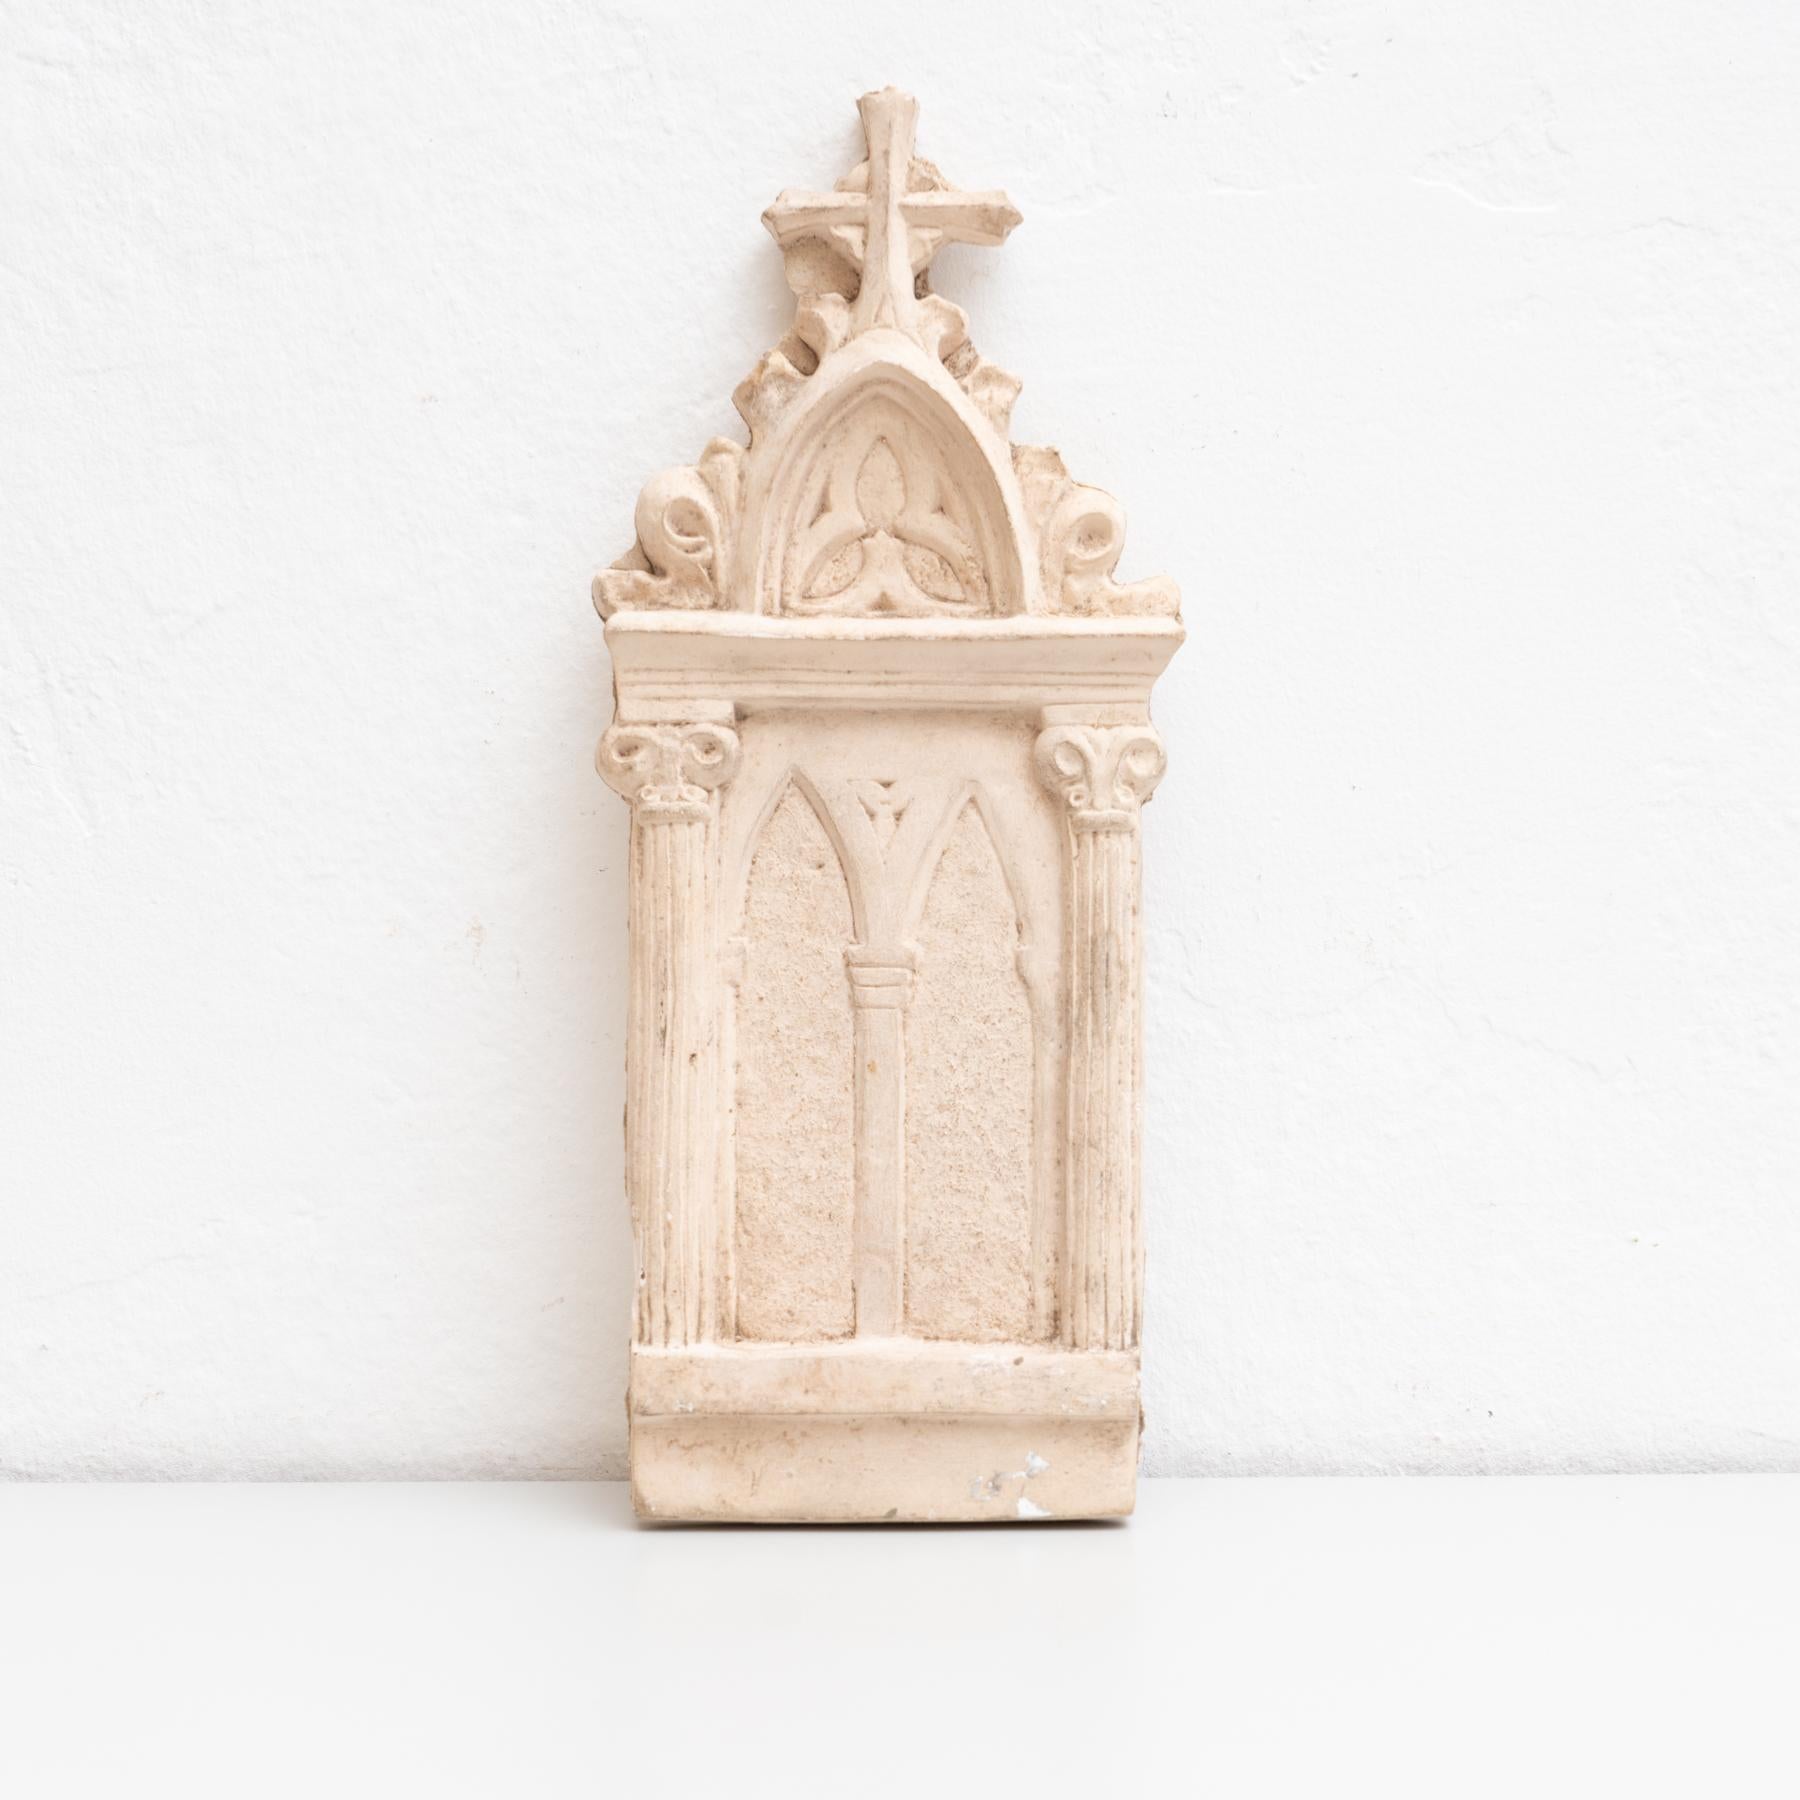 Traditional religious plaster wall artwork of a church.

Made in traditional Catalan atelier in Olot, Spain, circa 1950.

In original condition, with minor wear consistent with age and use, preserving a beautiful